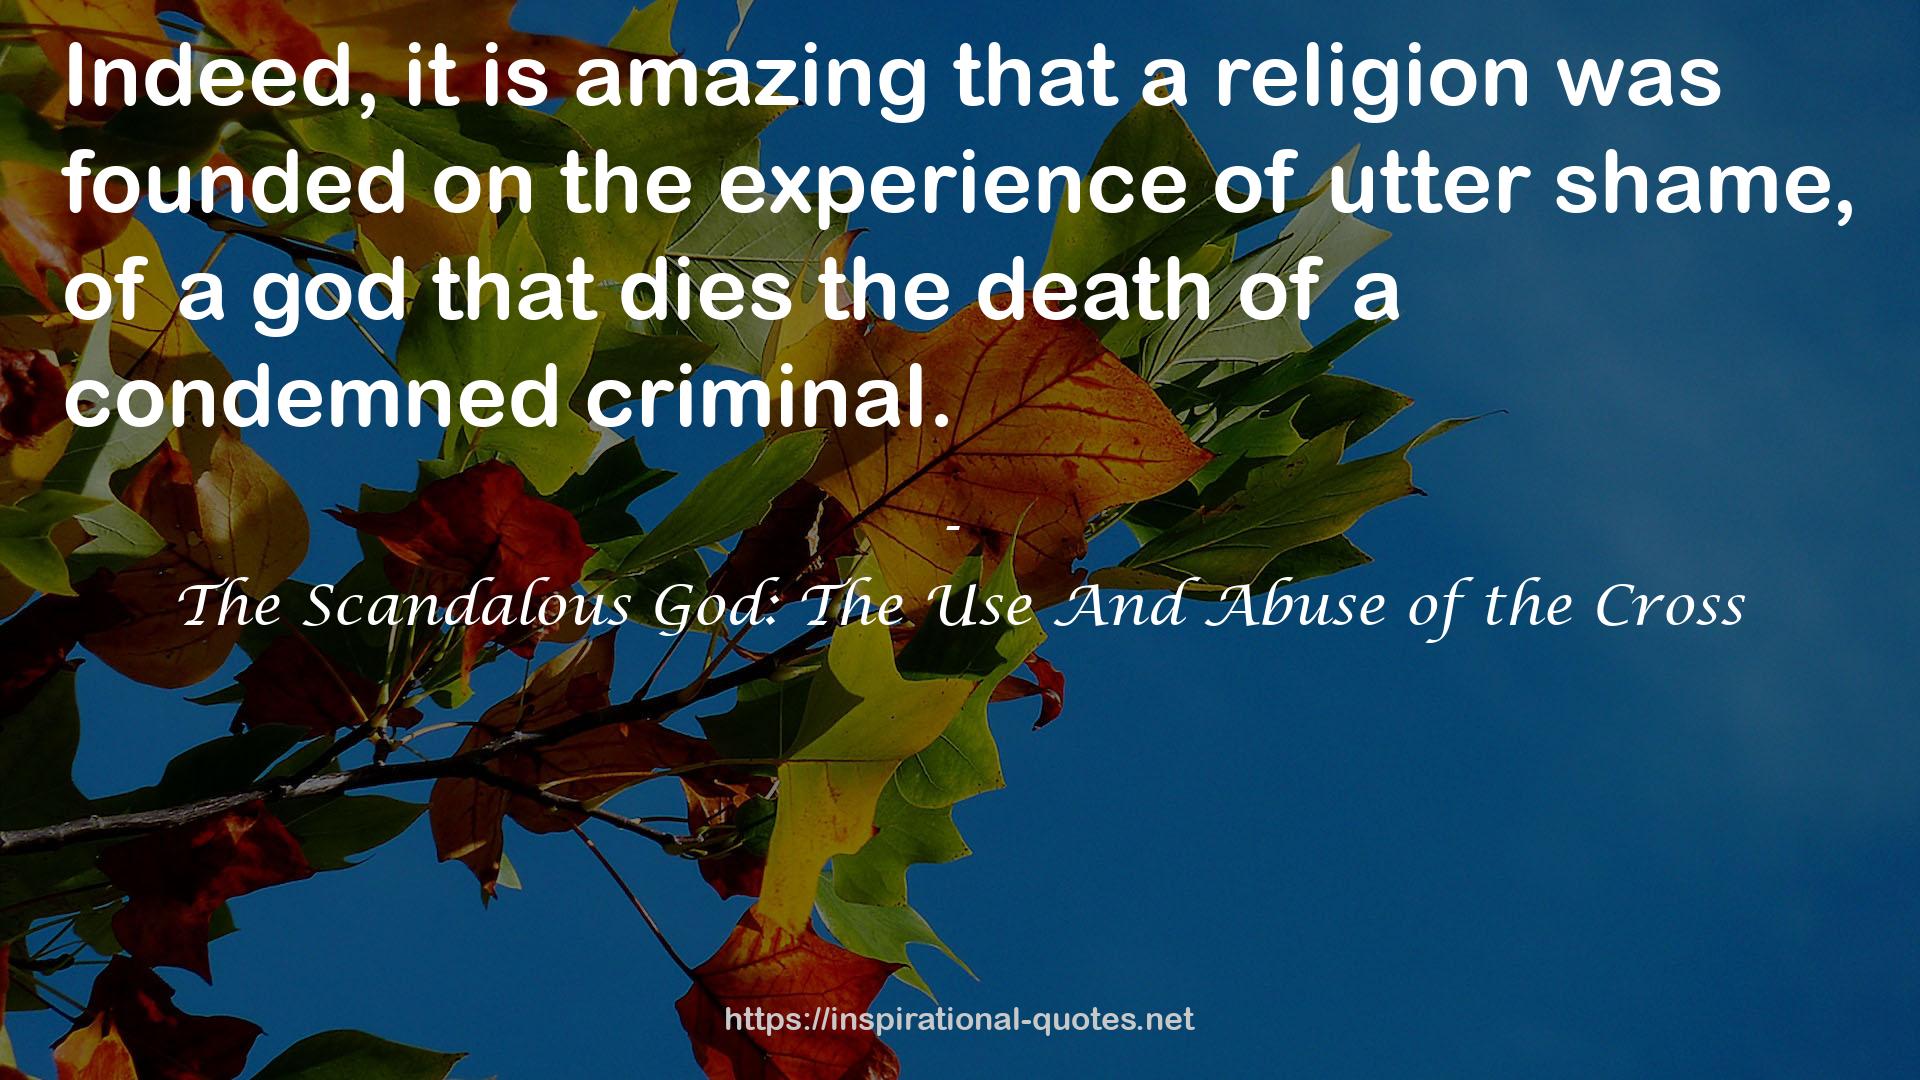 The Scandalous God: The Use And Abuse of the Cross QUOTES